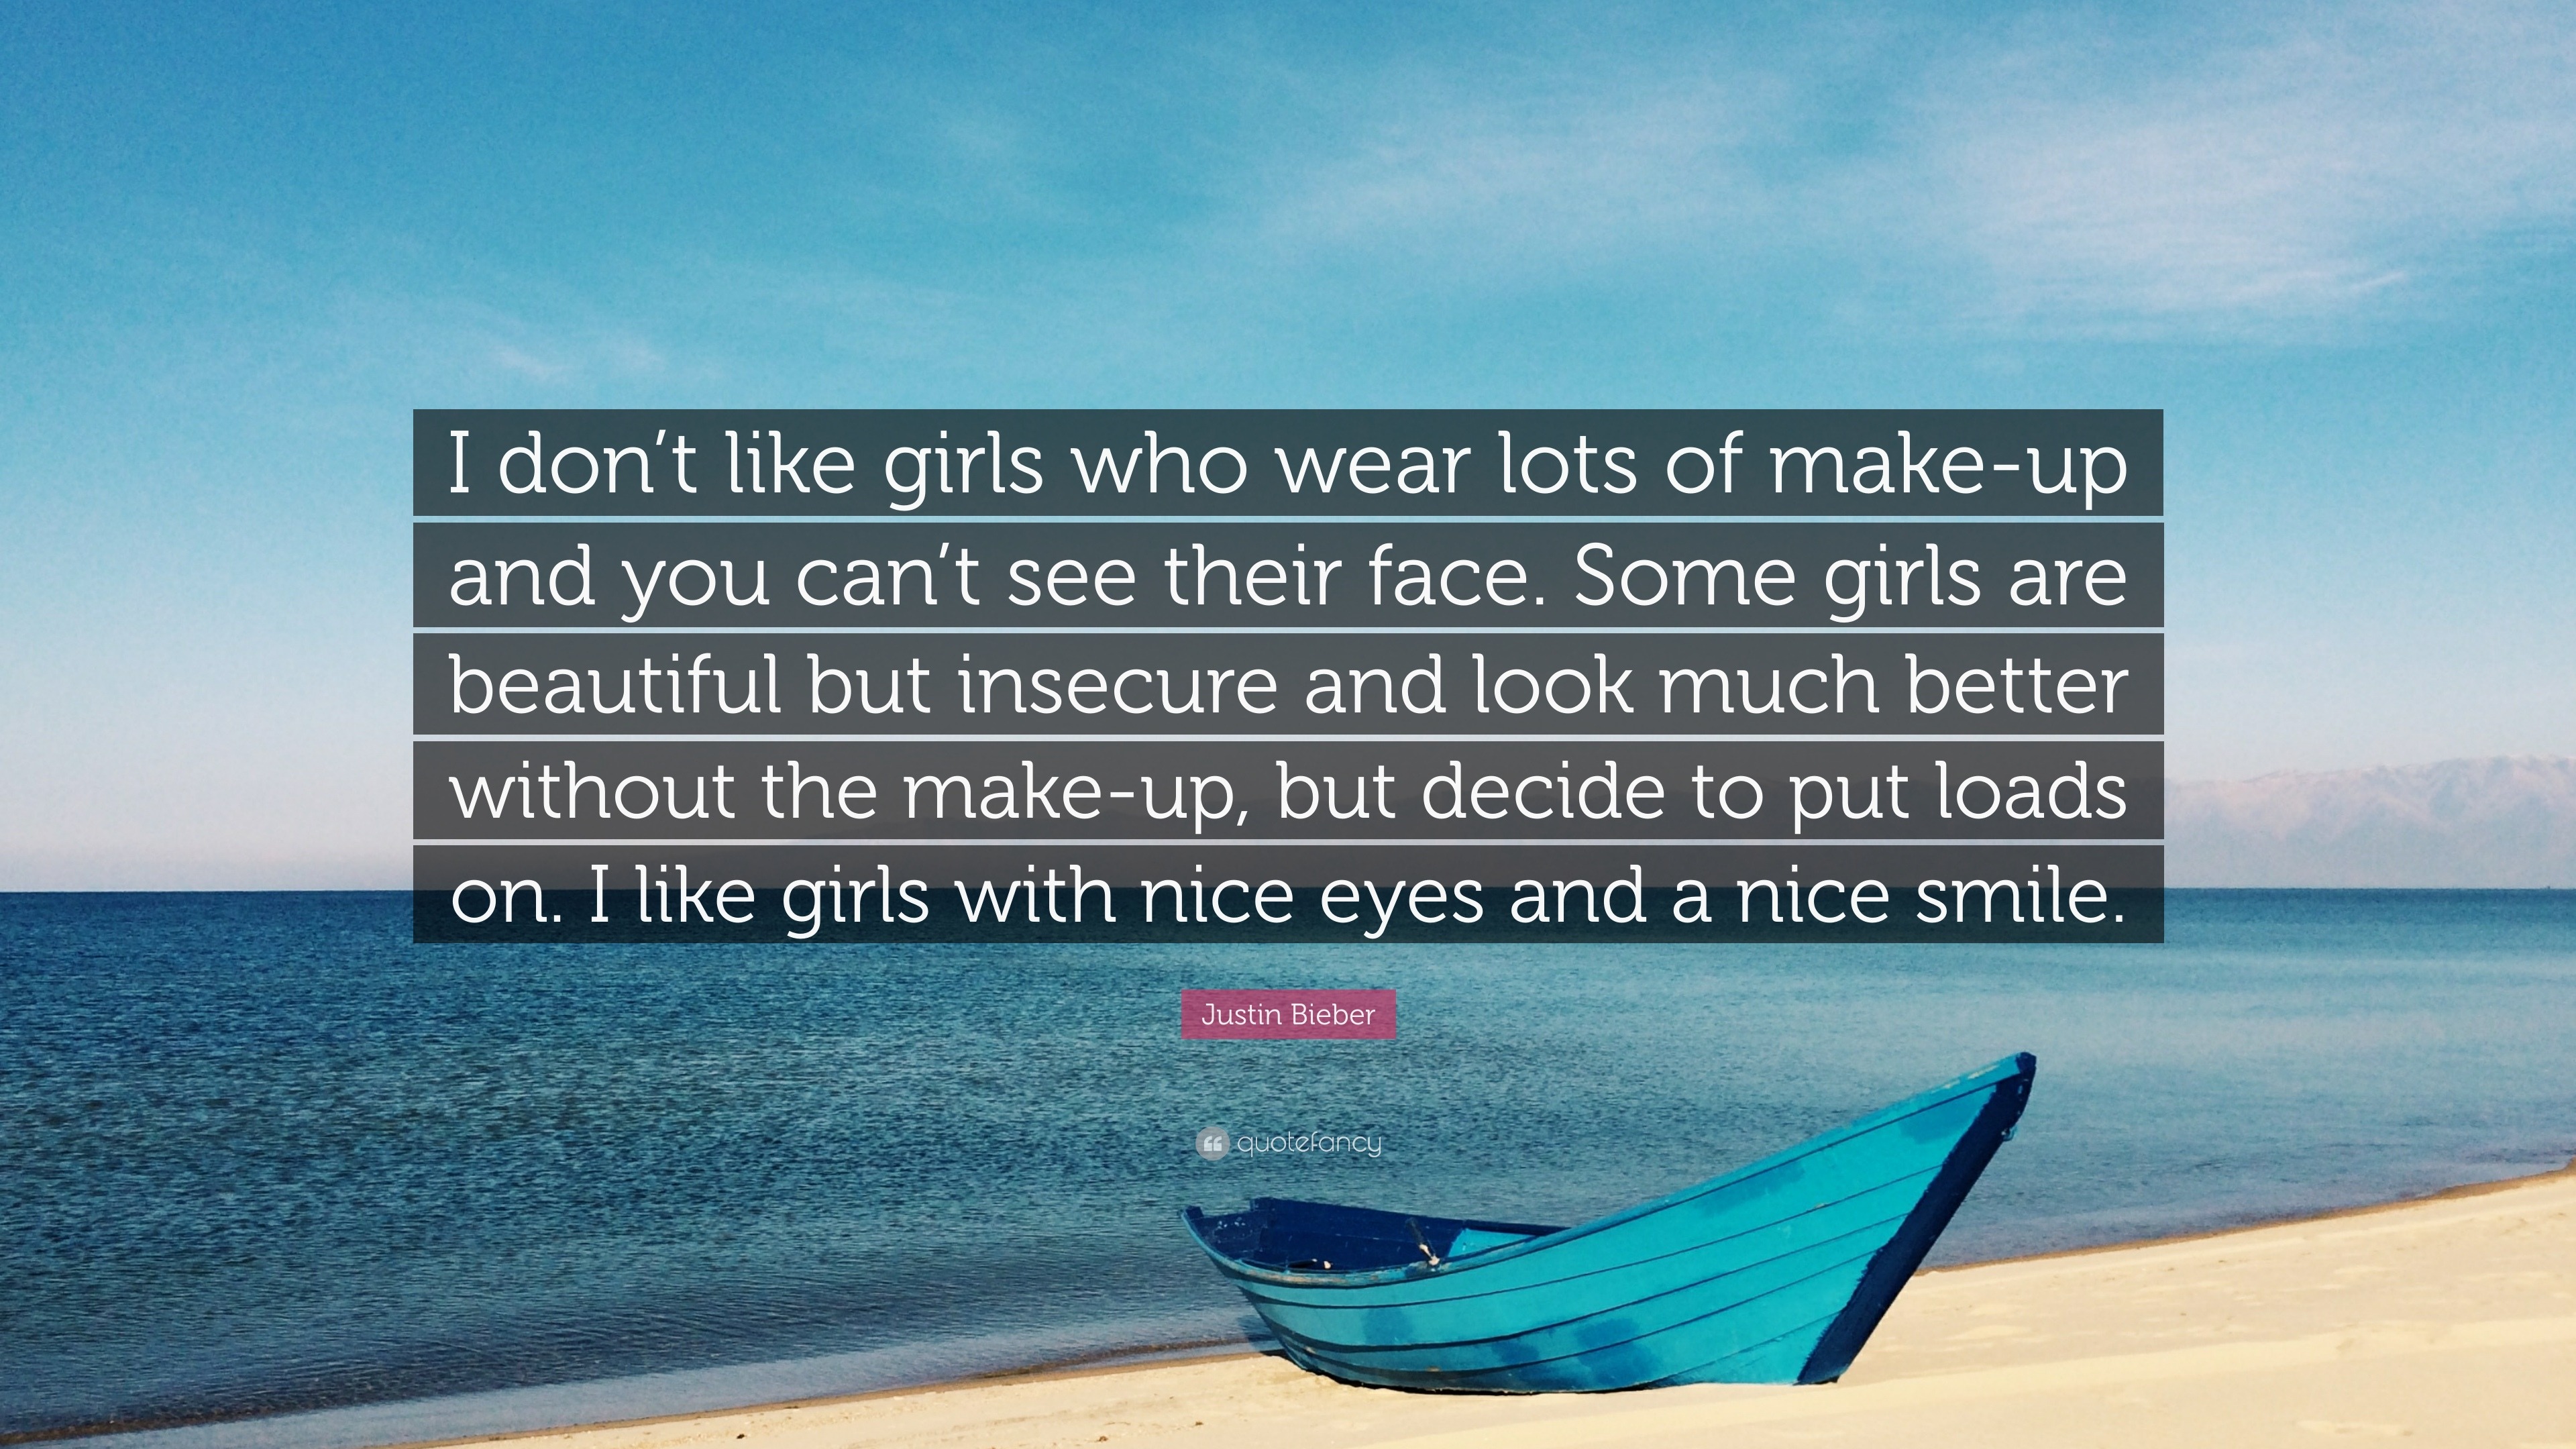 I don’t like girls who wear lots of make-up and you can’t see their face. 